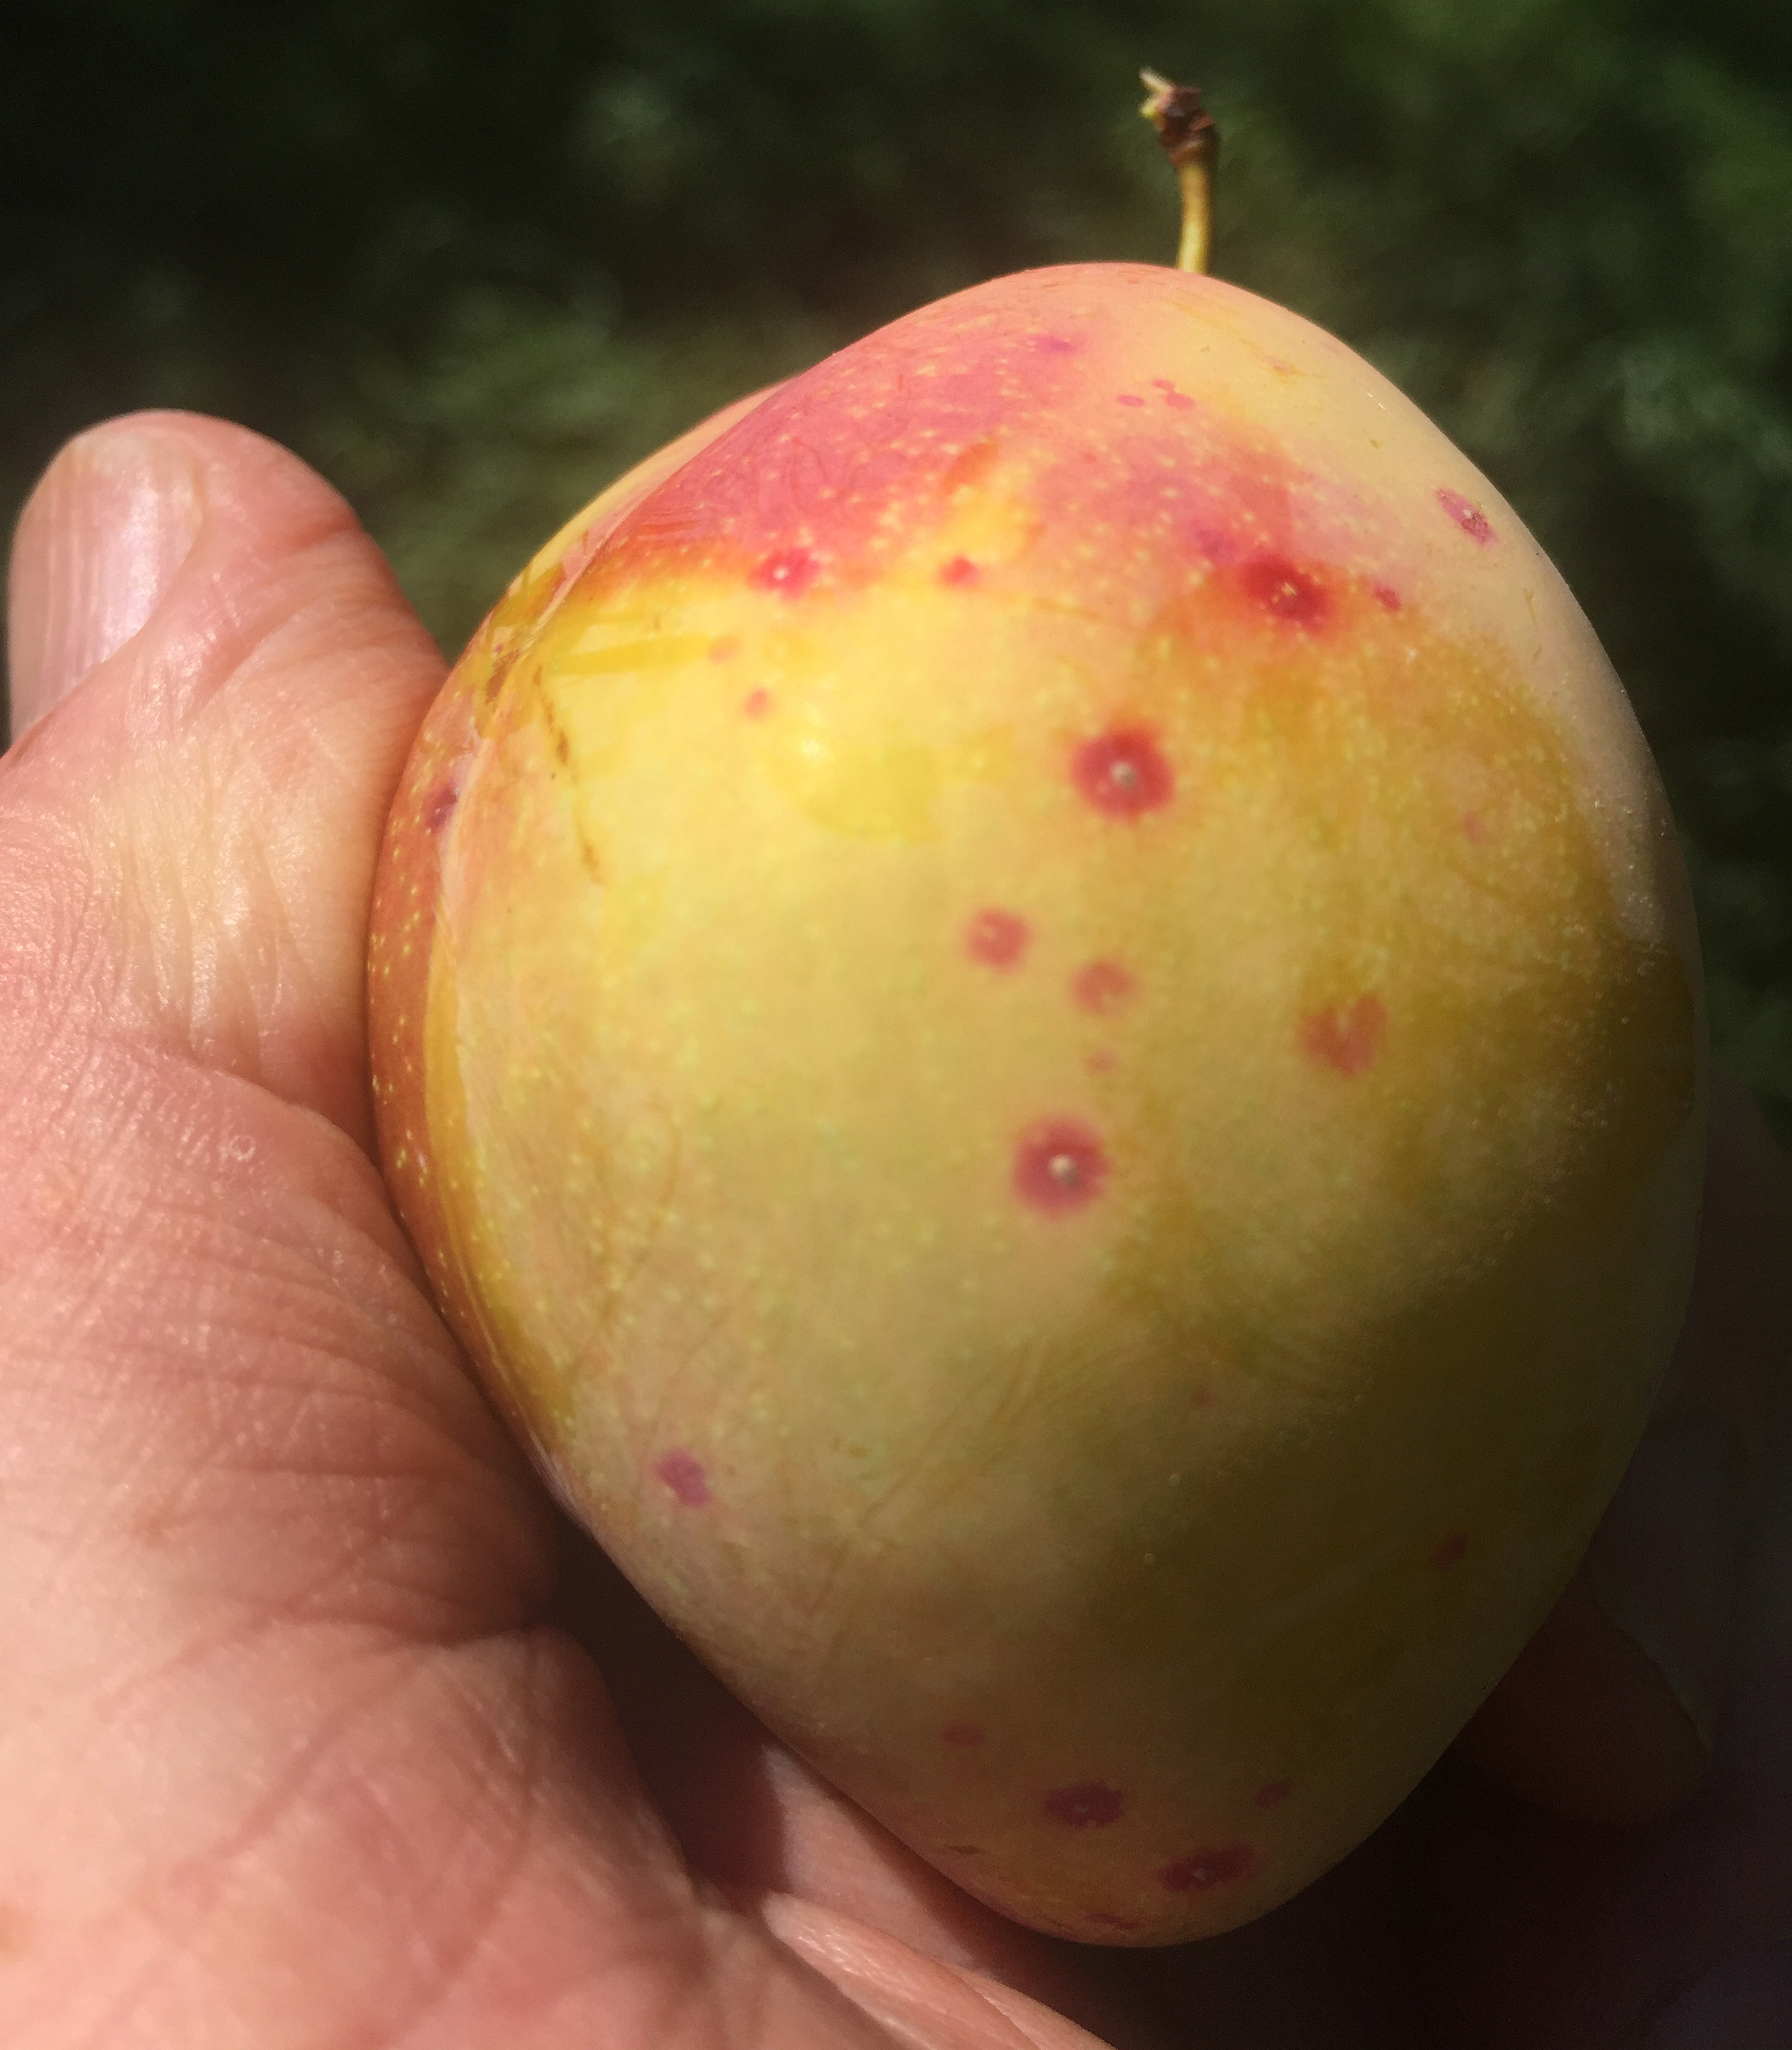 Red spots on plum.